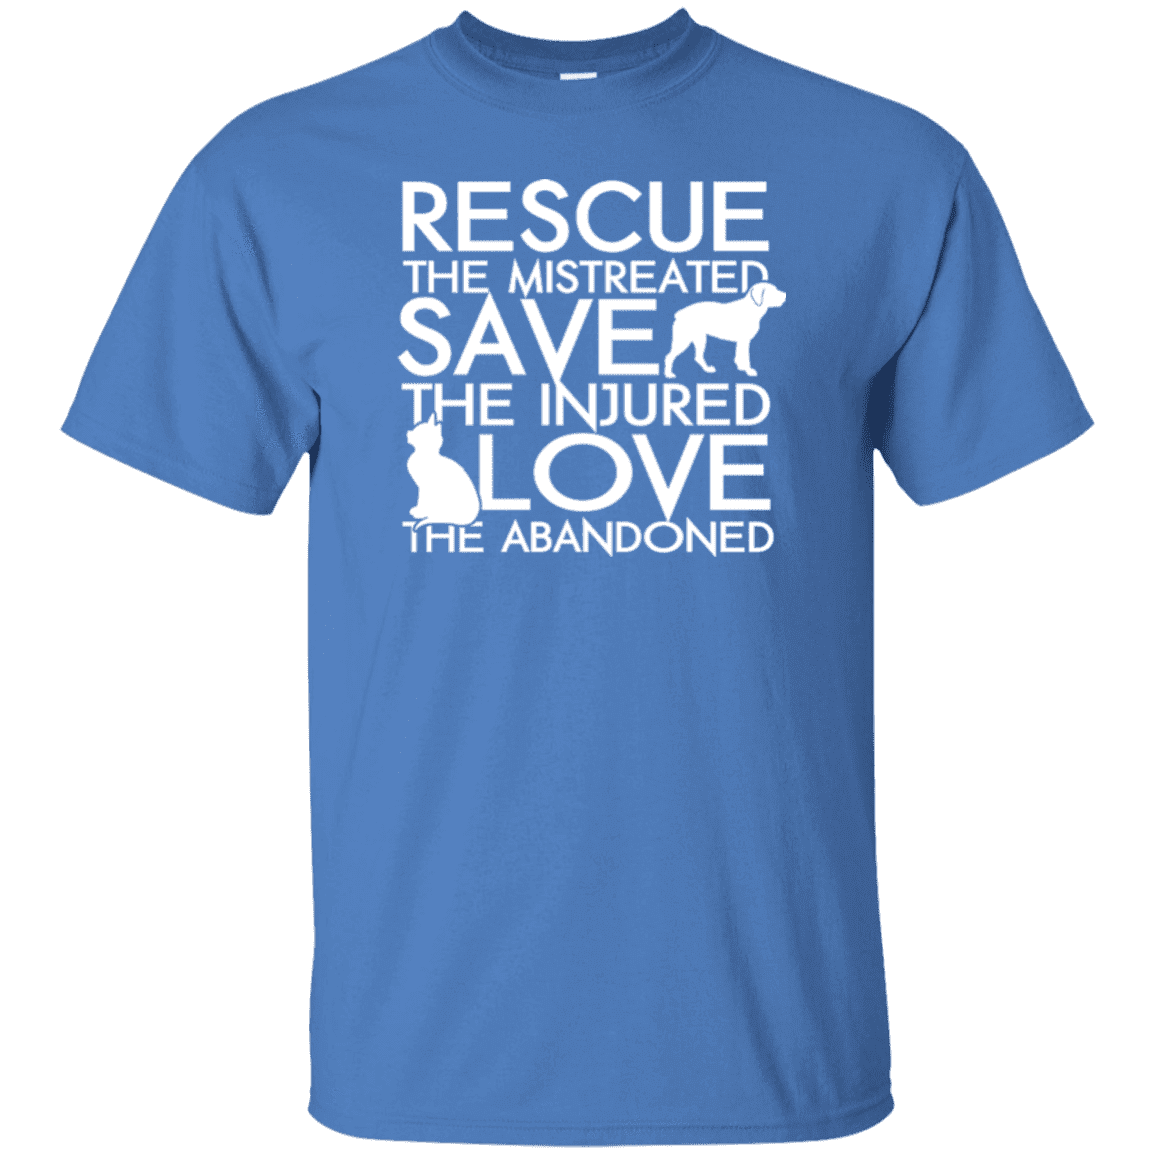 Rescue Save Love - Youth T Shirt.